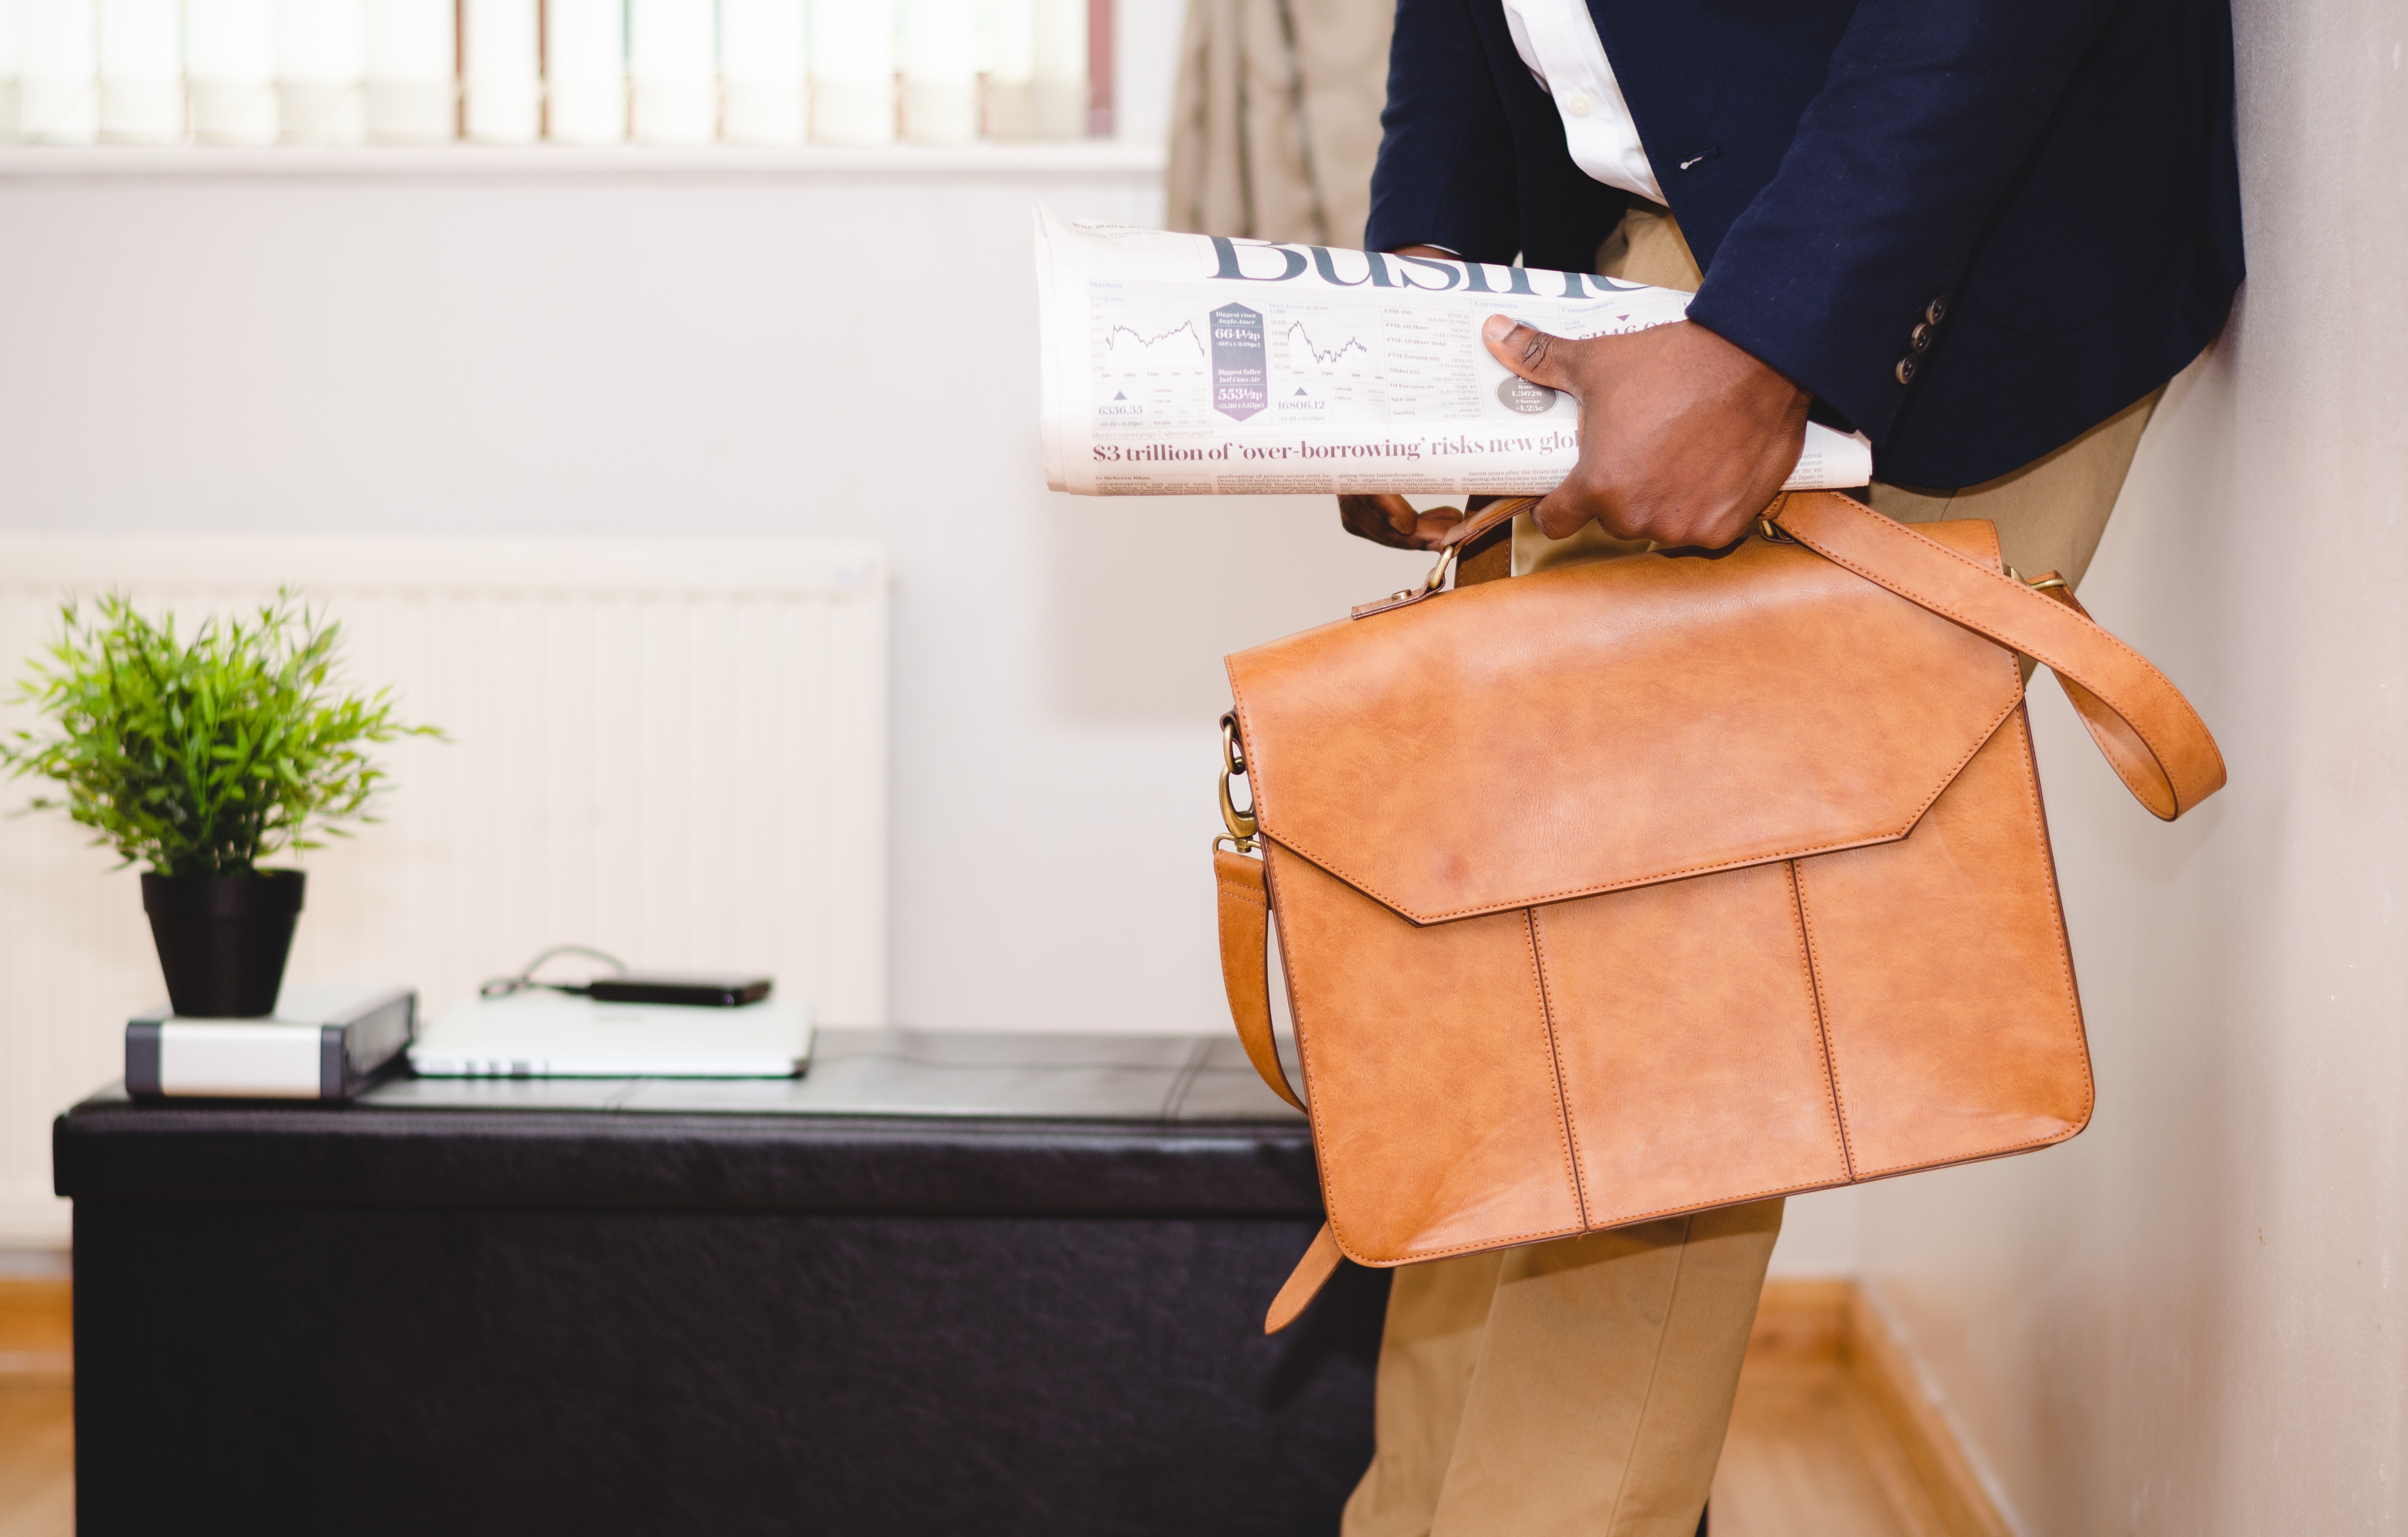 Person standing in an office holding a brown satchel and newspaper.